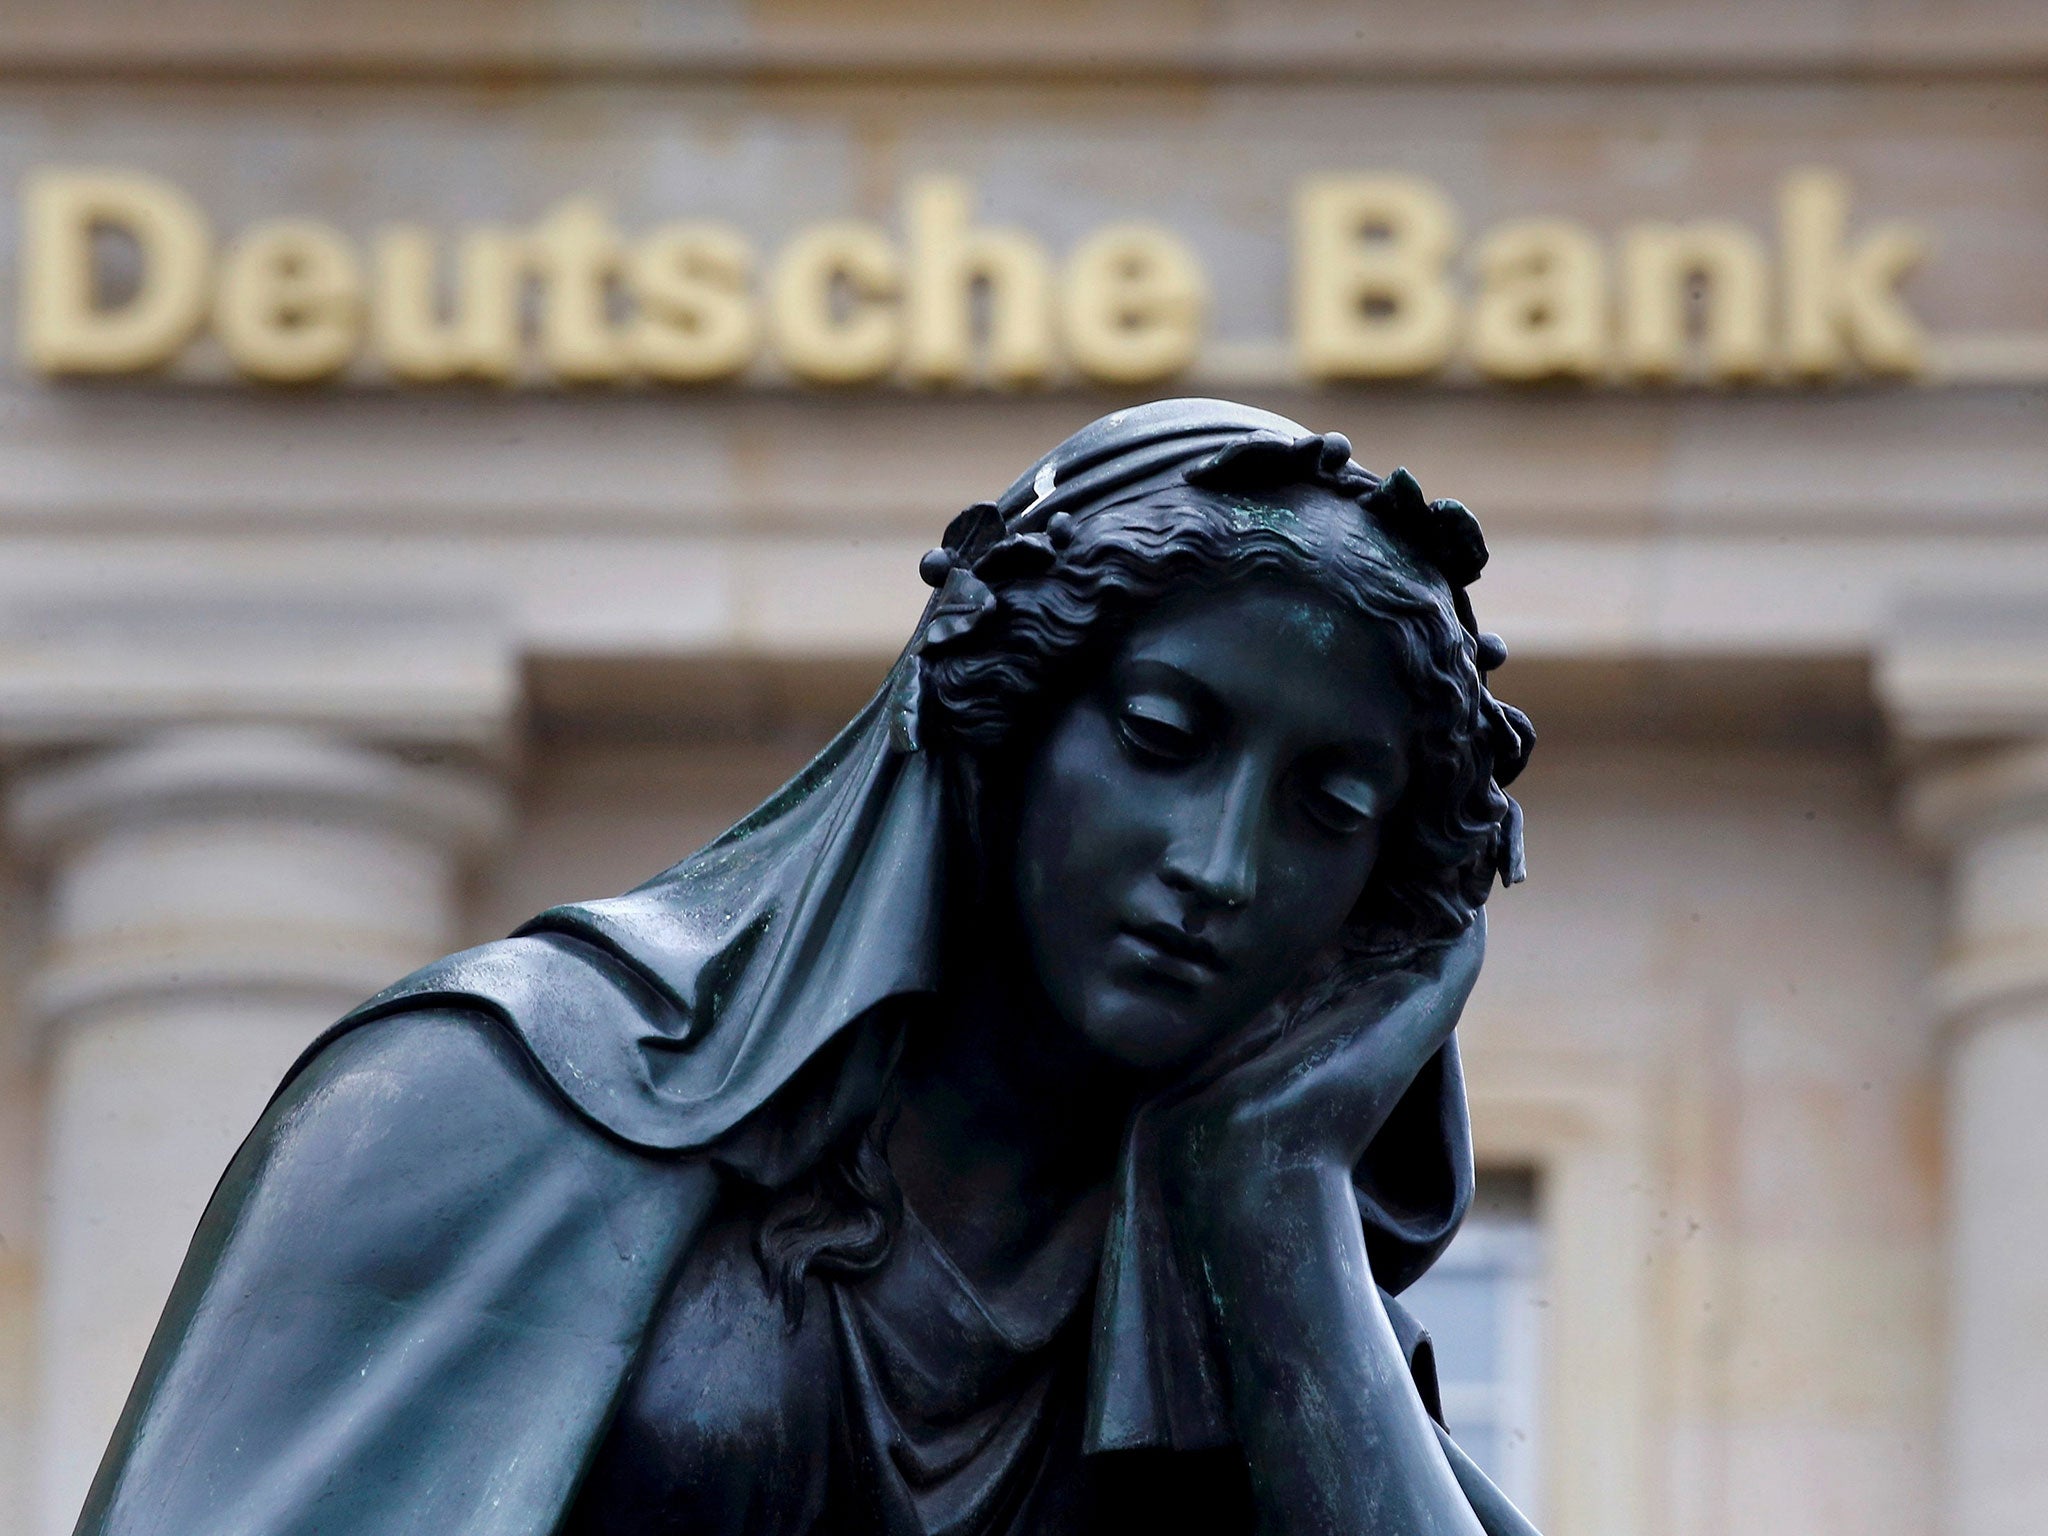 Deutsche Bank: Fund manager Hermes has a message for this powerful financial institution